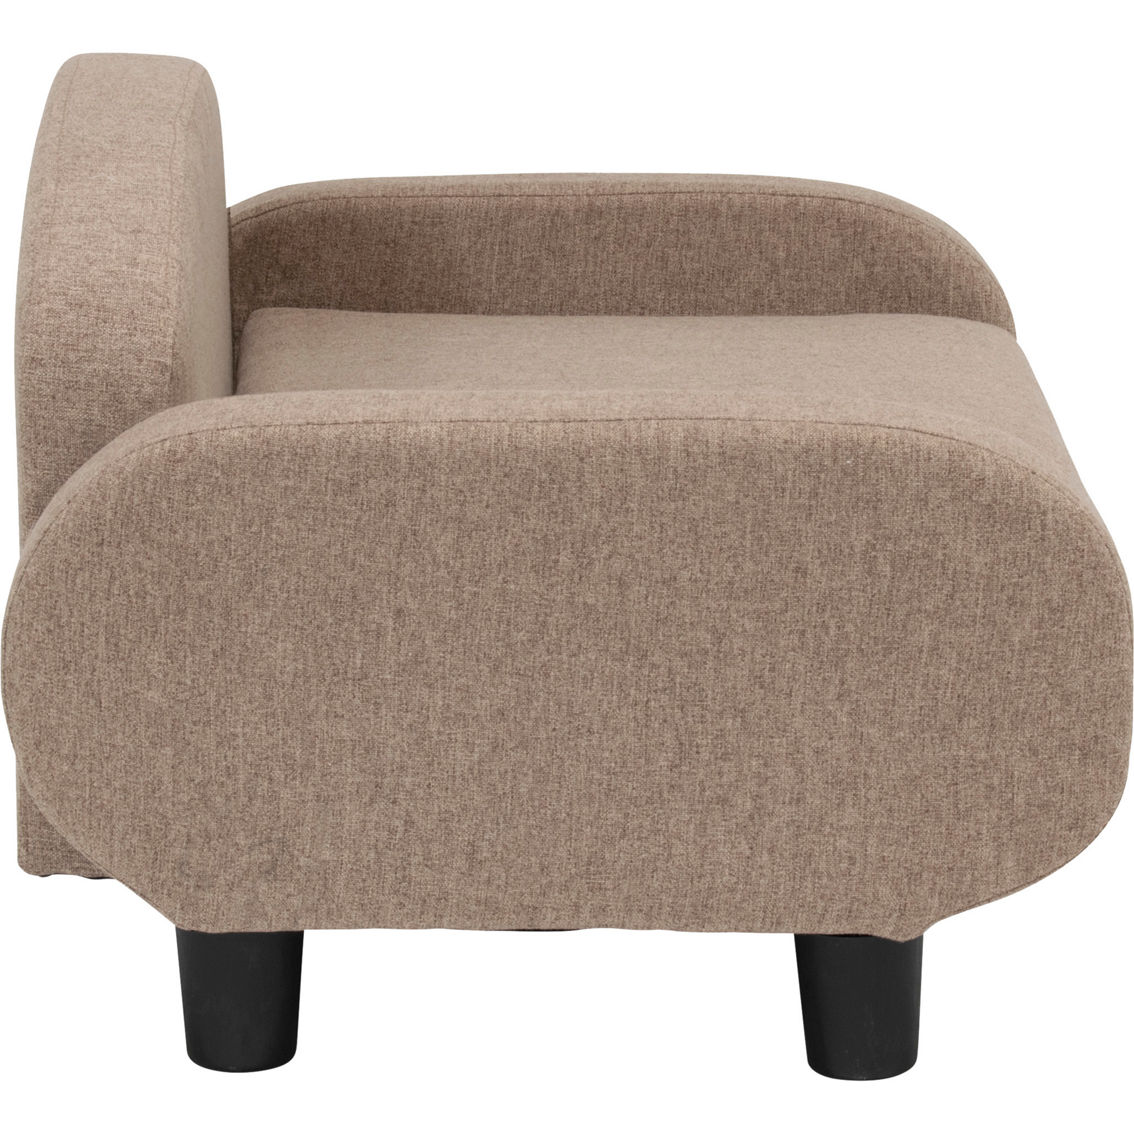 Studio Designs Paws and Purrs Pet Sofa Small - Image 6 of 9